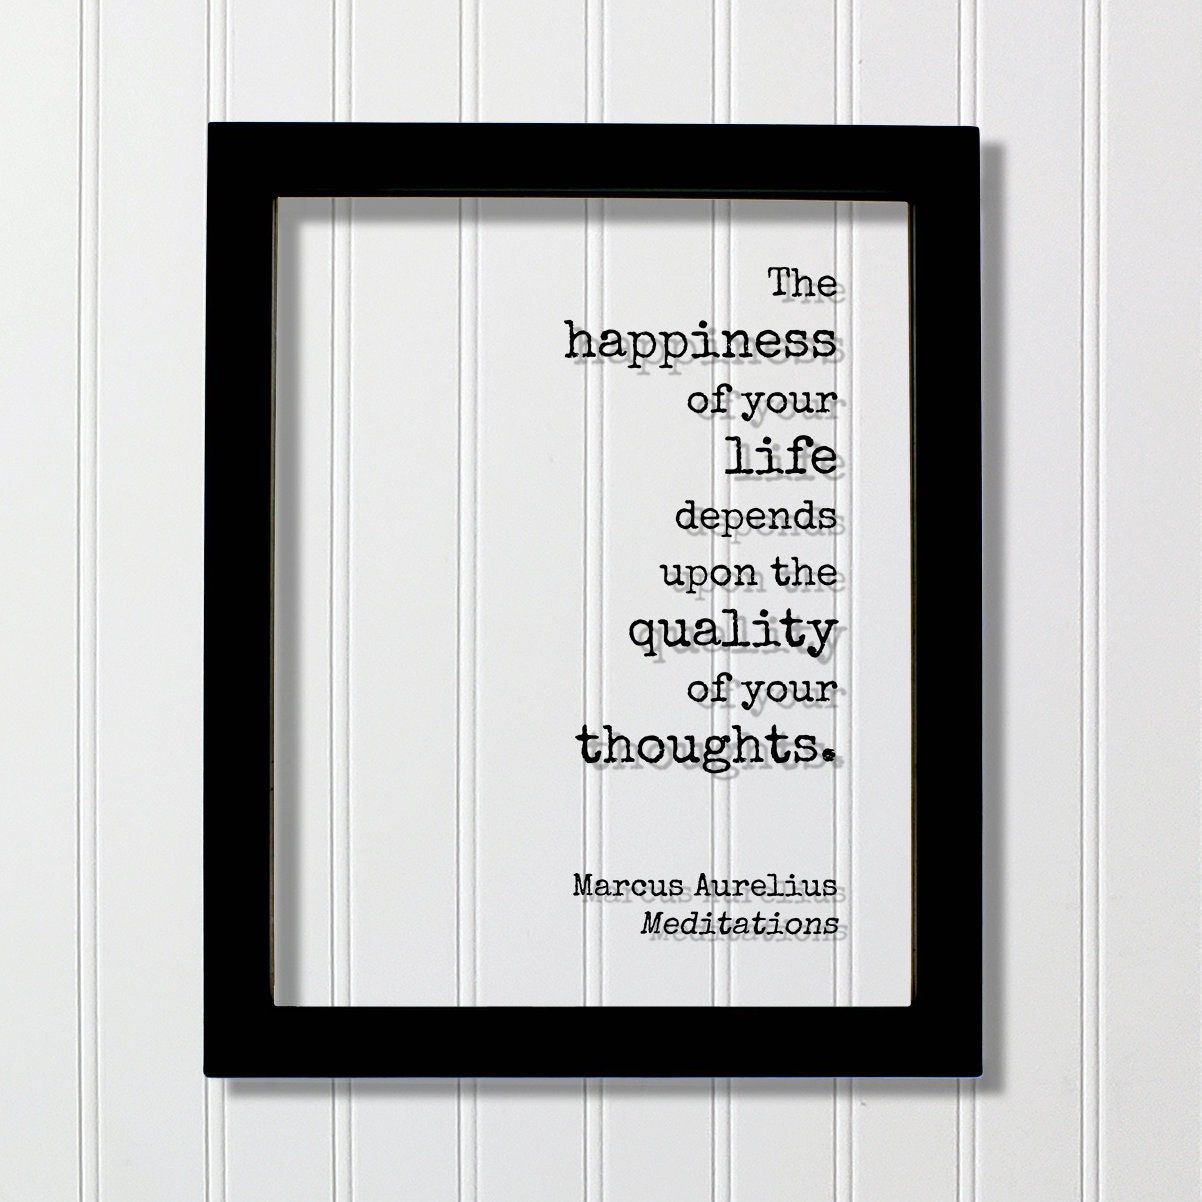 Marcus Aurelius Meditations Floating Quote The happiness | Etsy